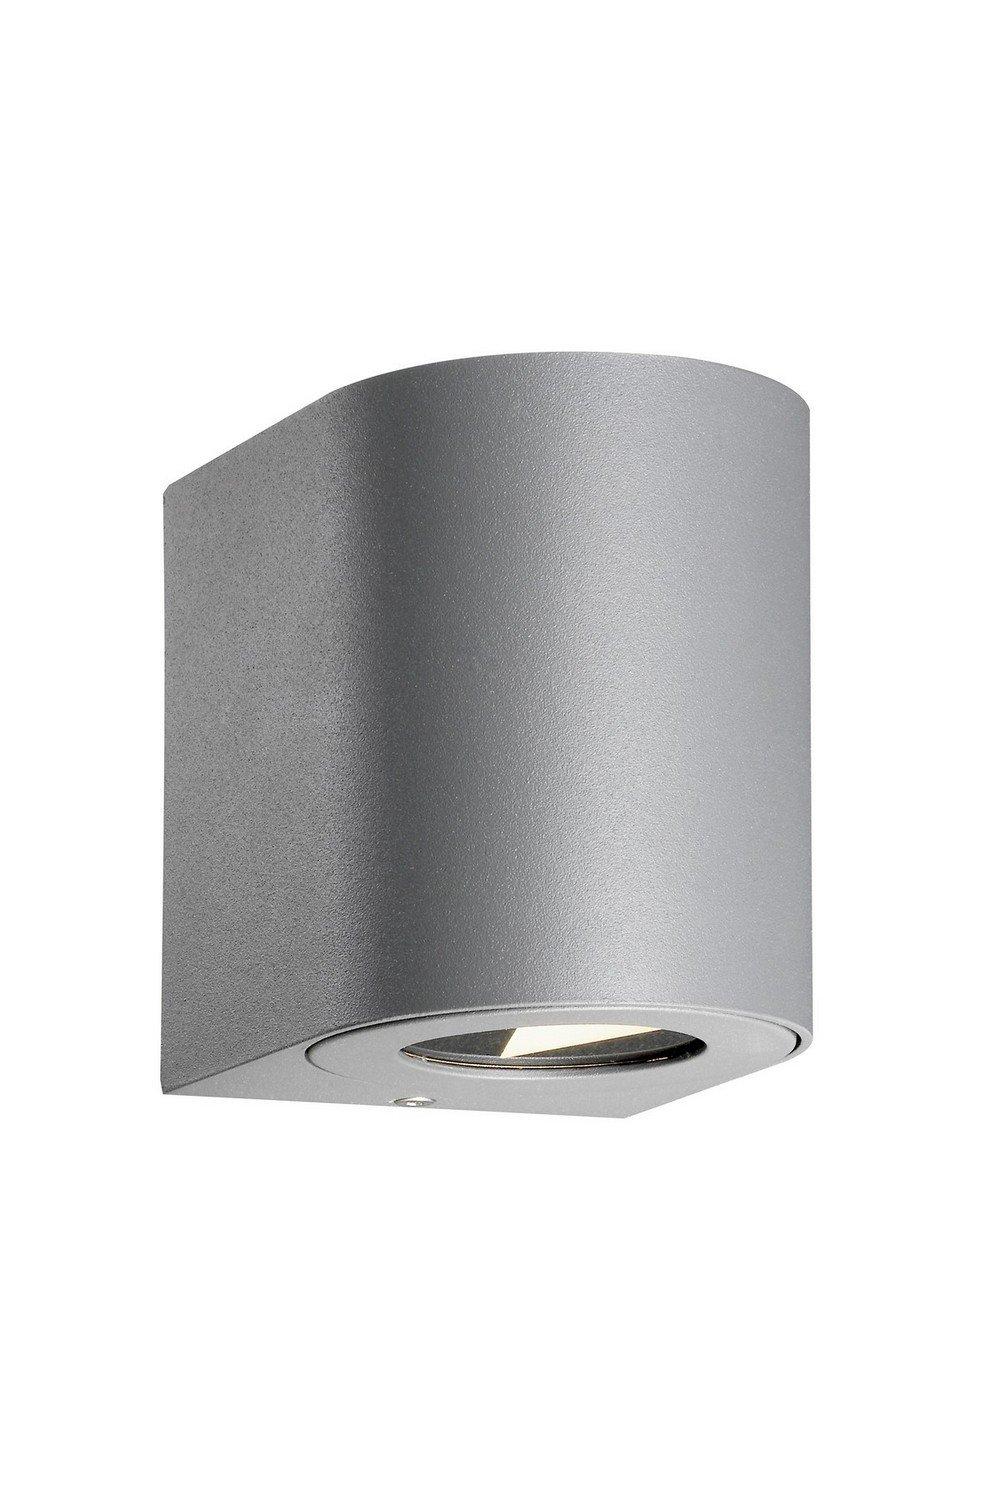 Canto LED Outdoor Up Down Wall Lamp Grey IP44 2700K